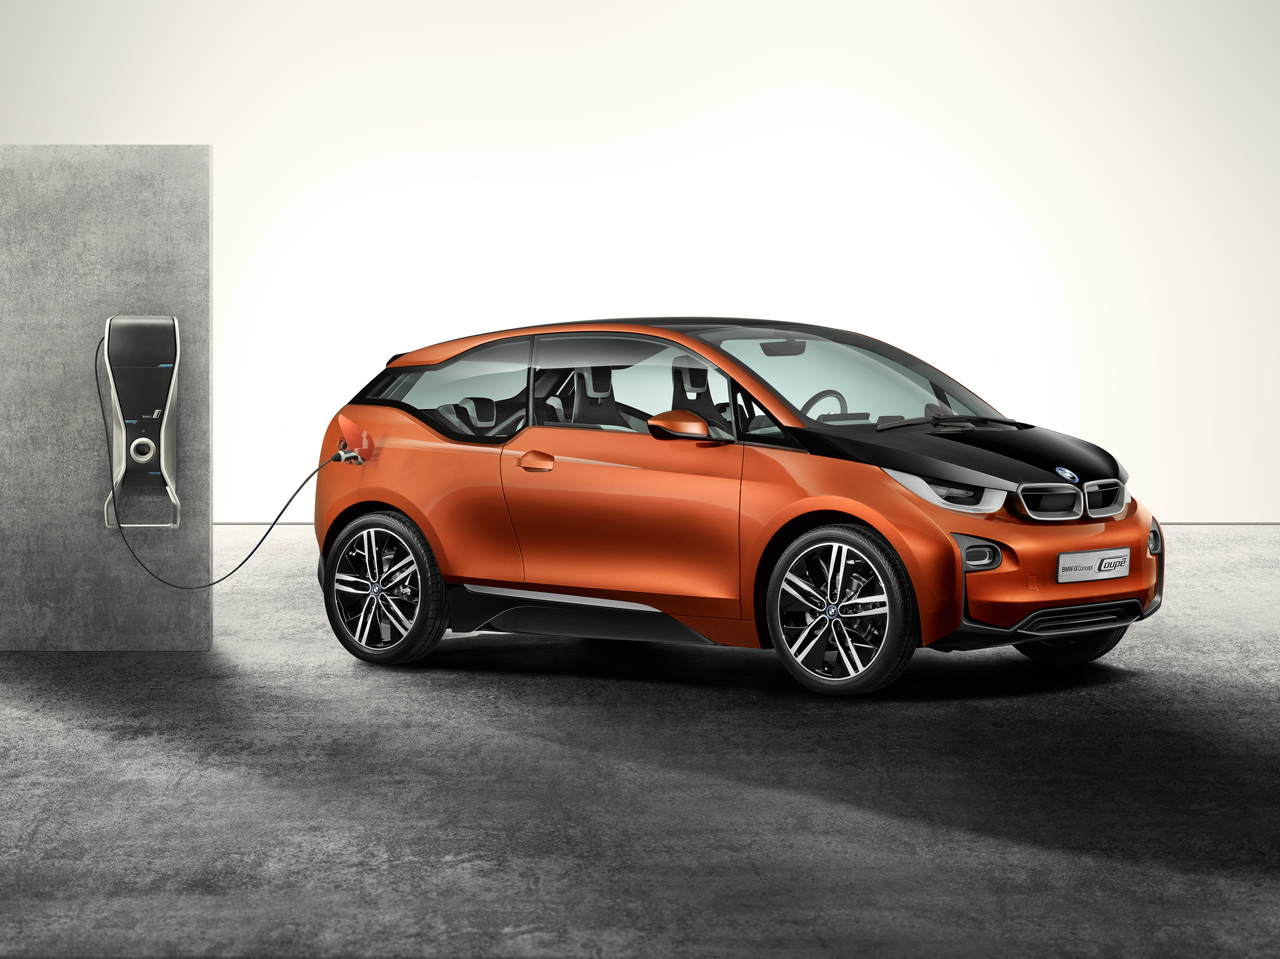 BMW to Launch i3 electric car in India in 2014